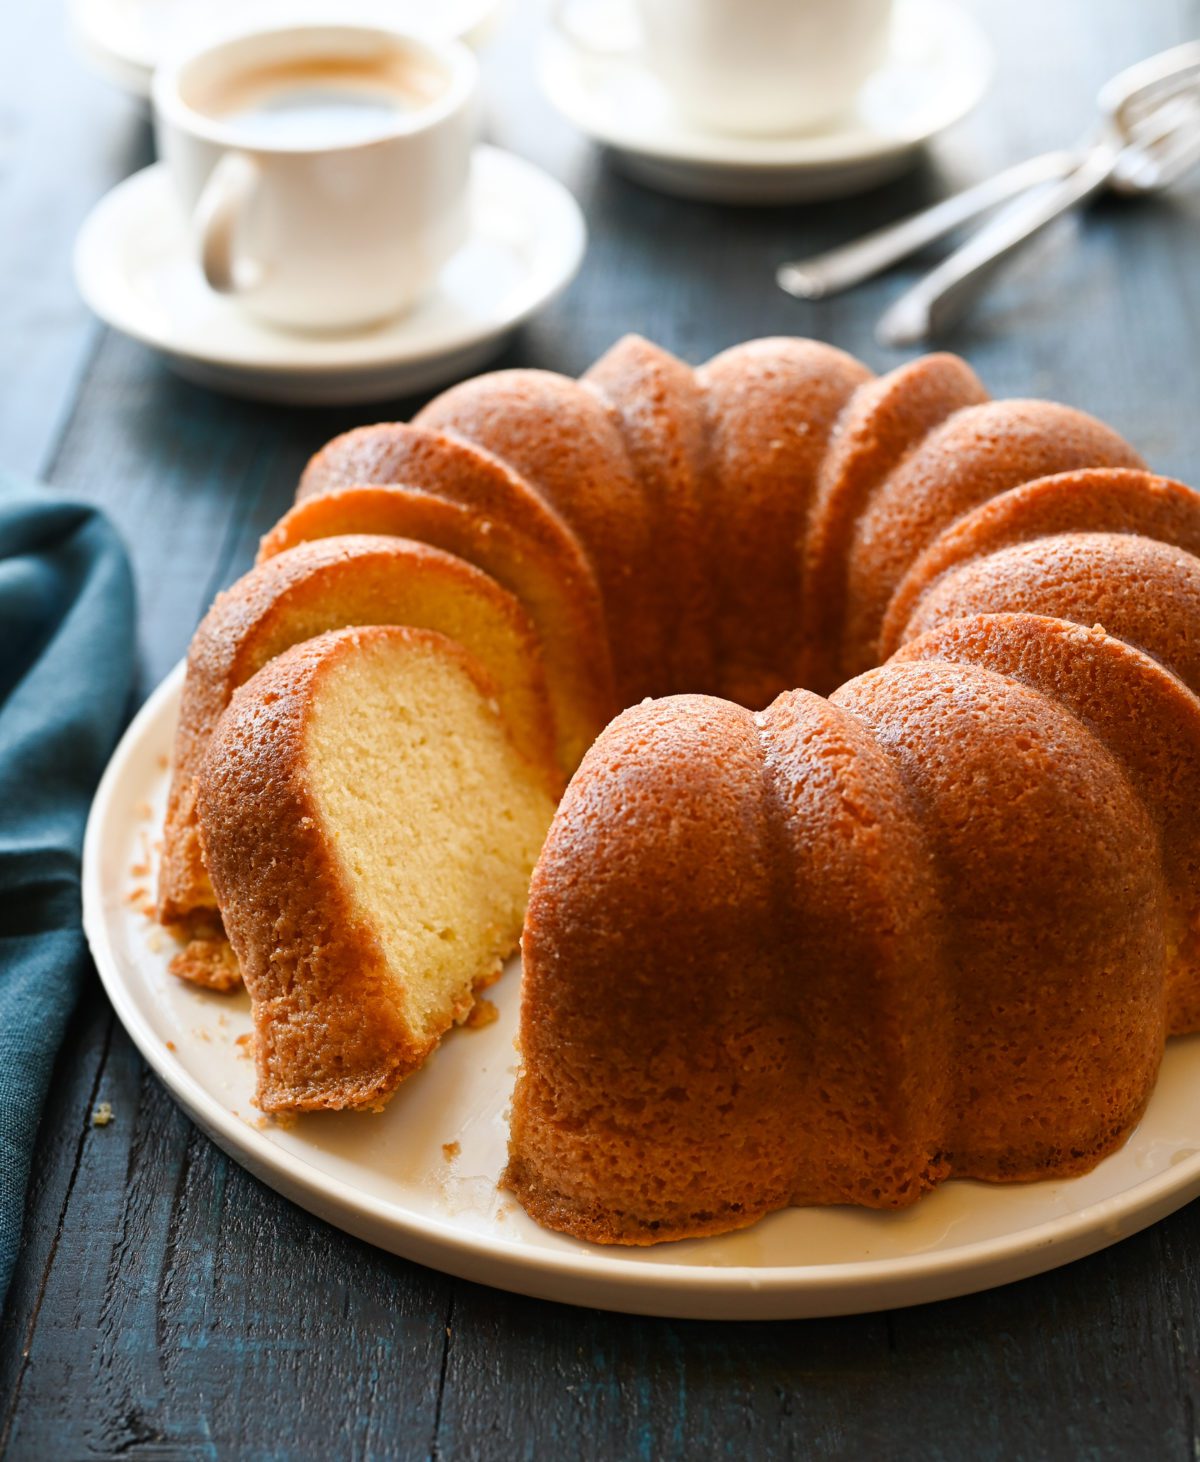 Recipes - Rum Raisin Pound Cake with Buttered Rum Sauce